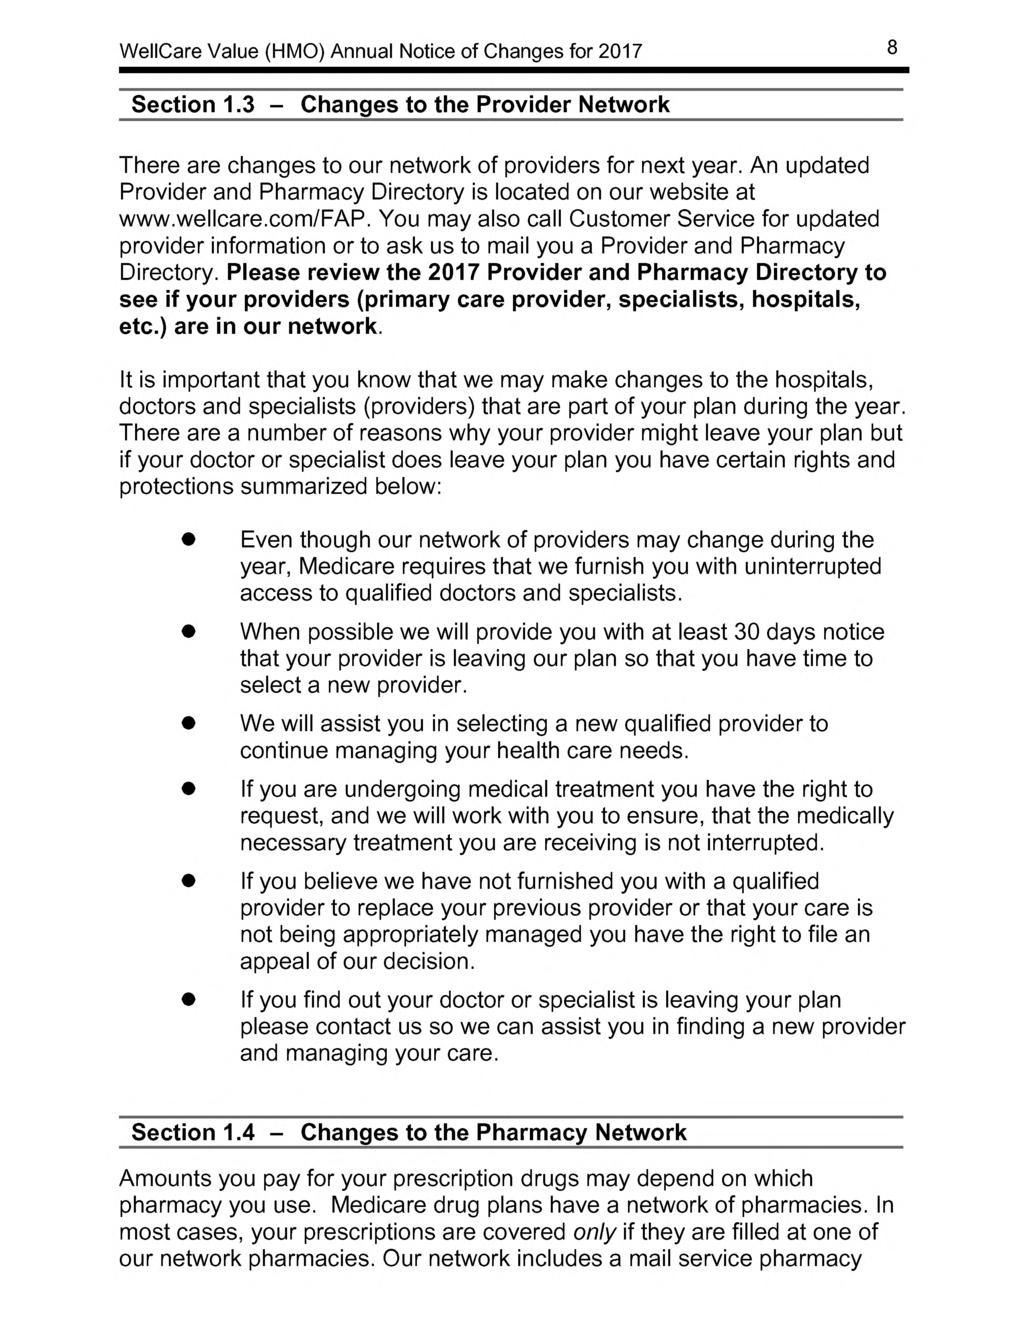 8 Section 1.3 Changes to the Provider Network There are changes to our network of providers for next year. An updated Provider and Pharmacy Directory is located on our website at www.wellcare.com/fap.